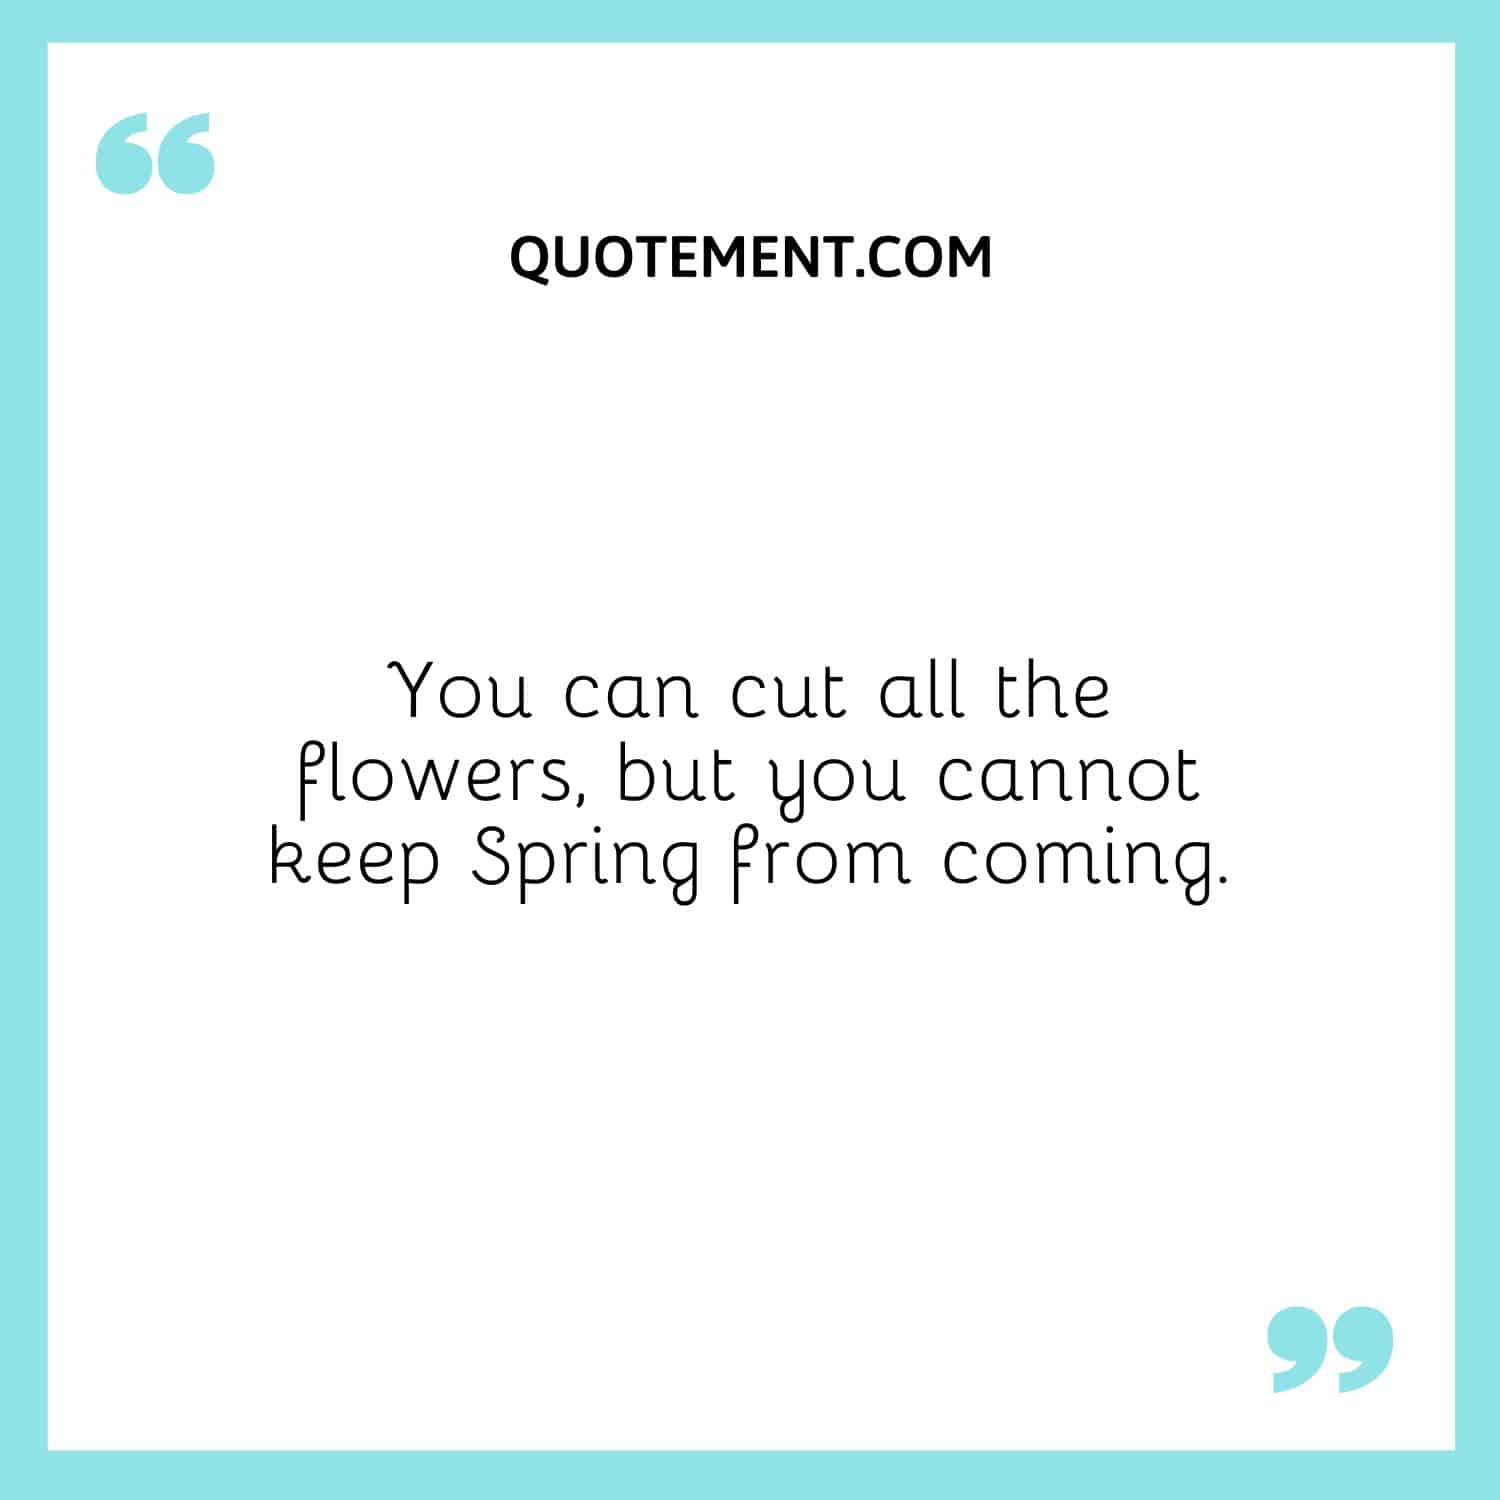 You can cut all the flowers, but you cannot keep Spring from coming